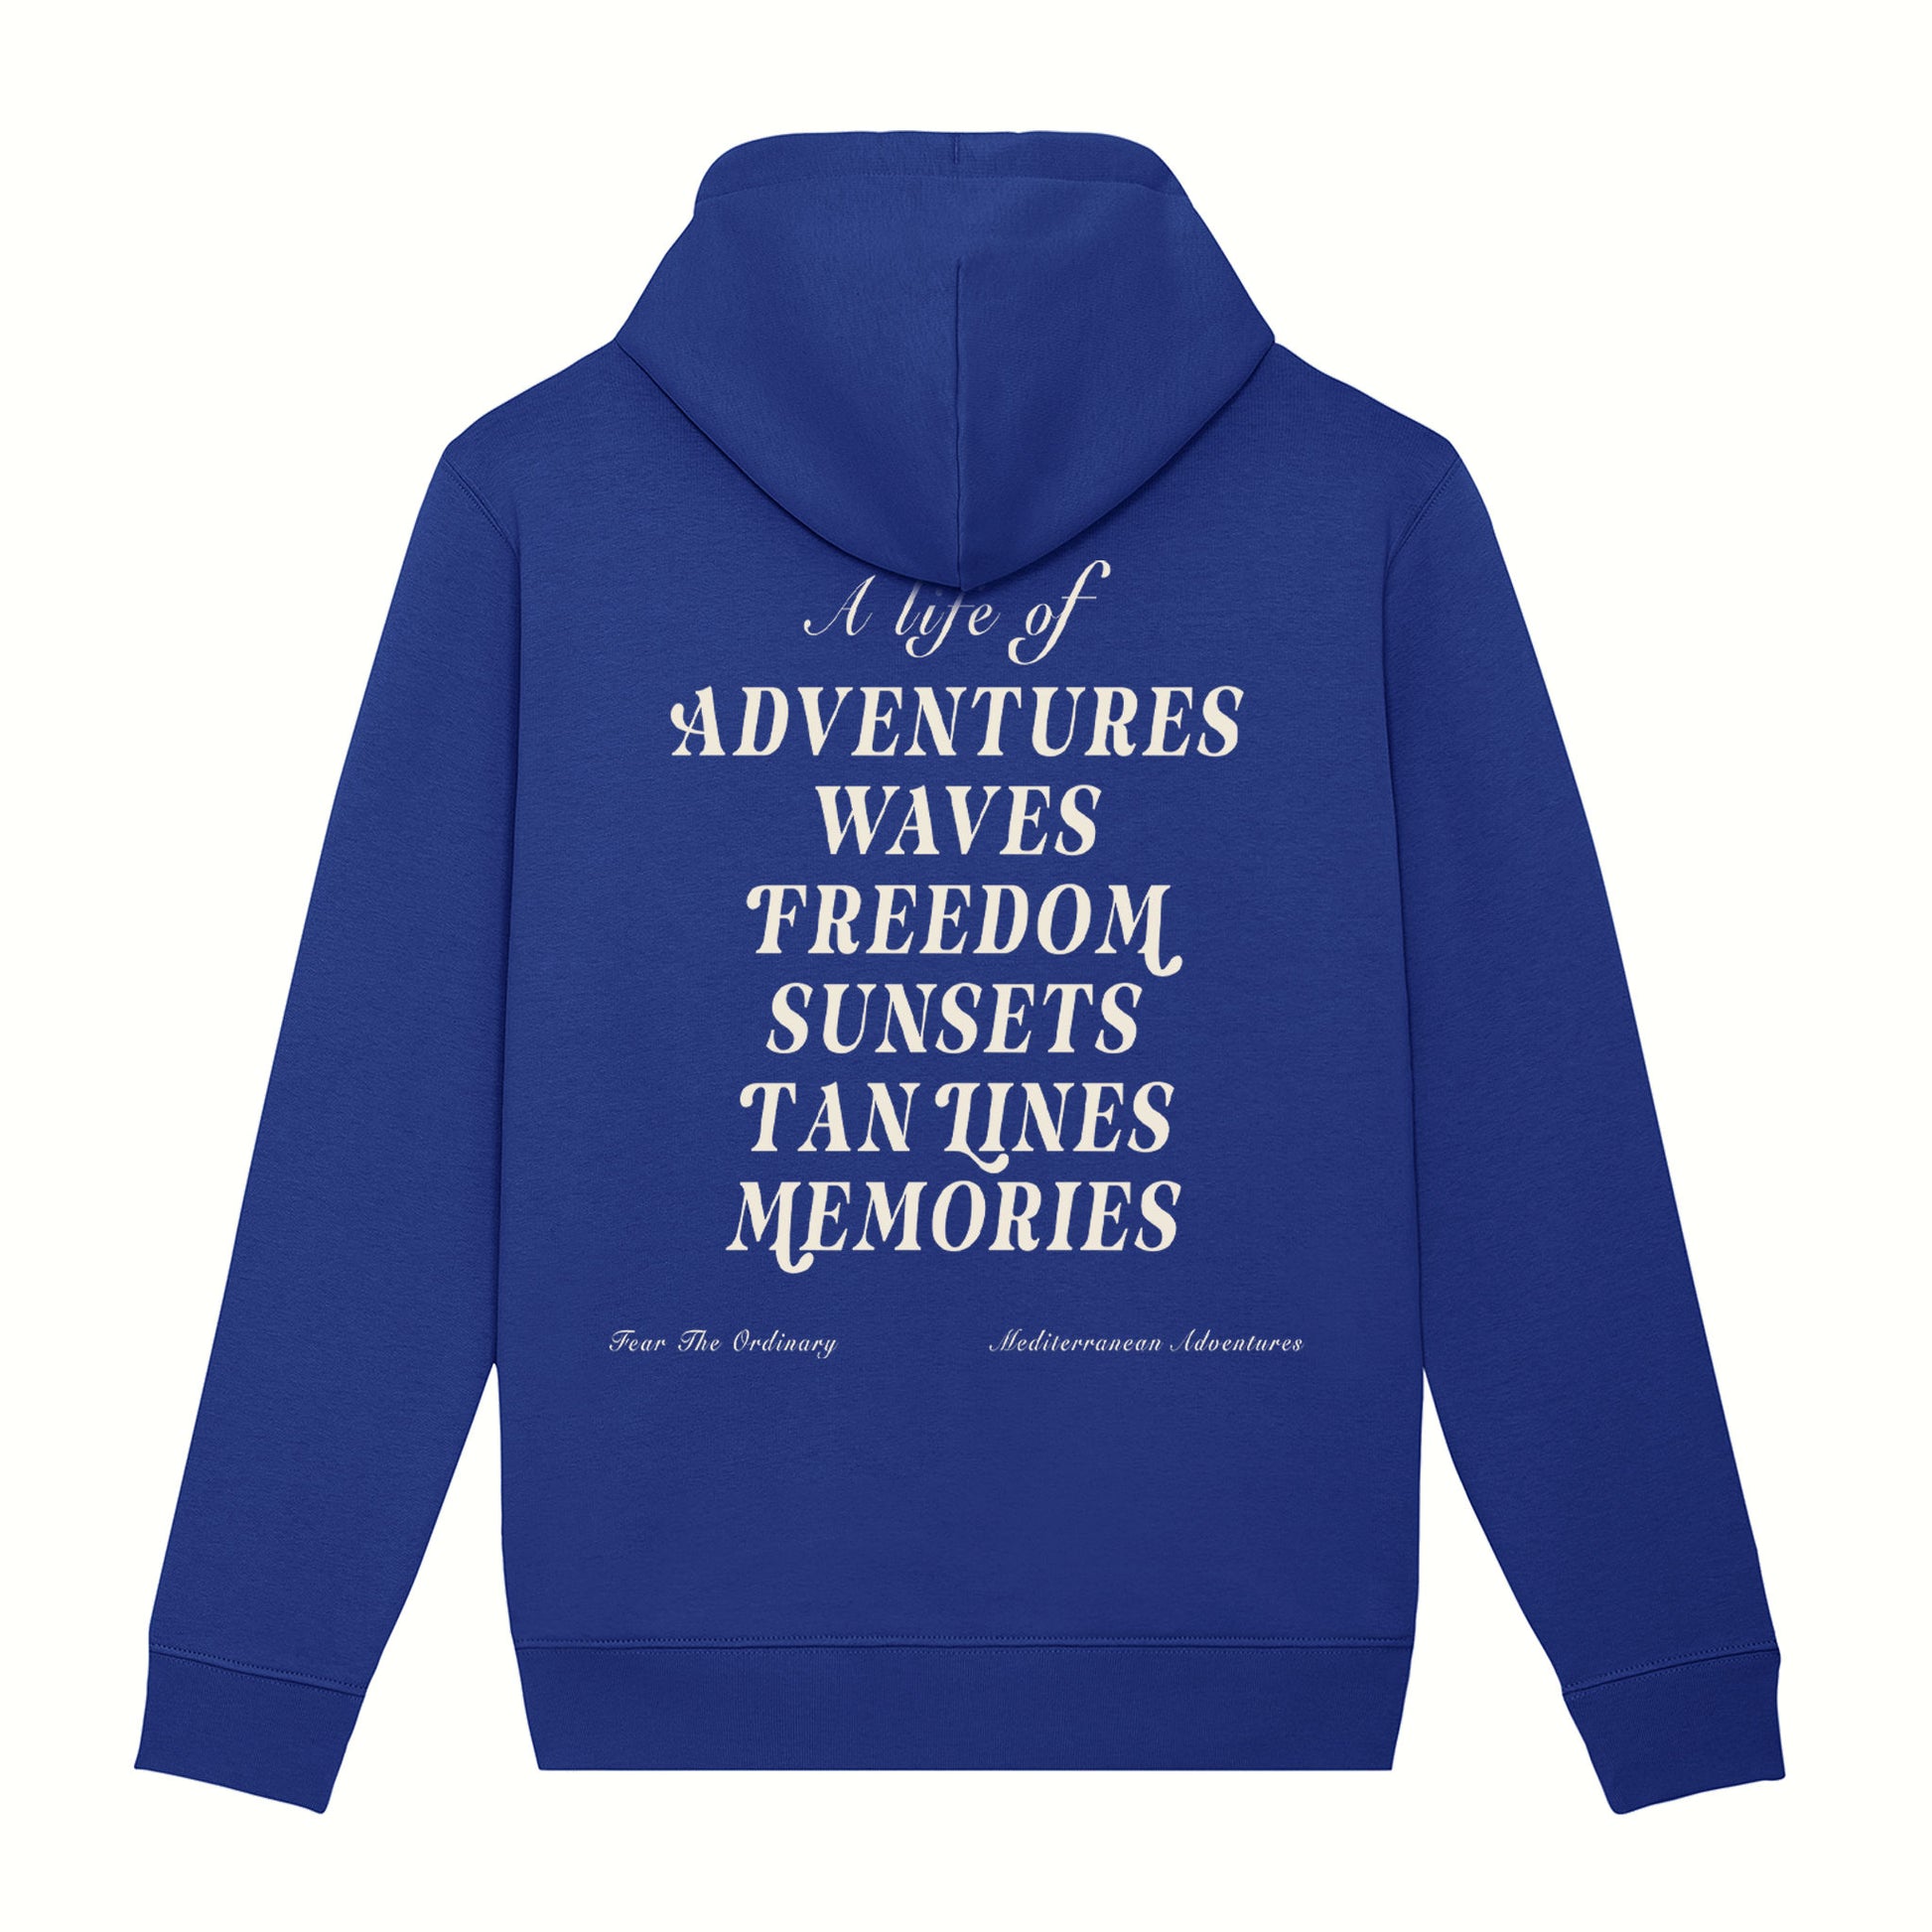 Fear the ordinary sea blue premium organic cotton hoodie with white adventure inspired back print.